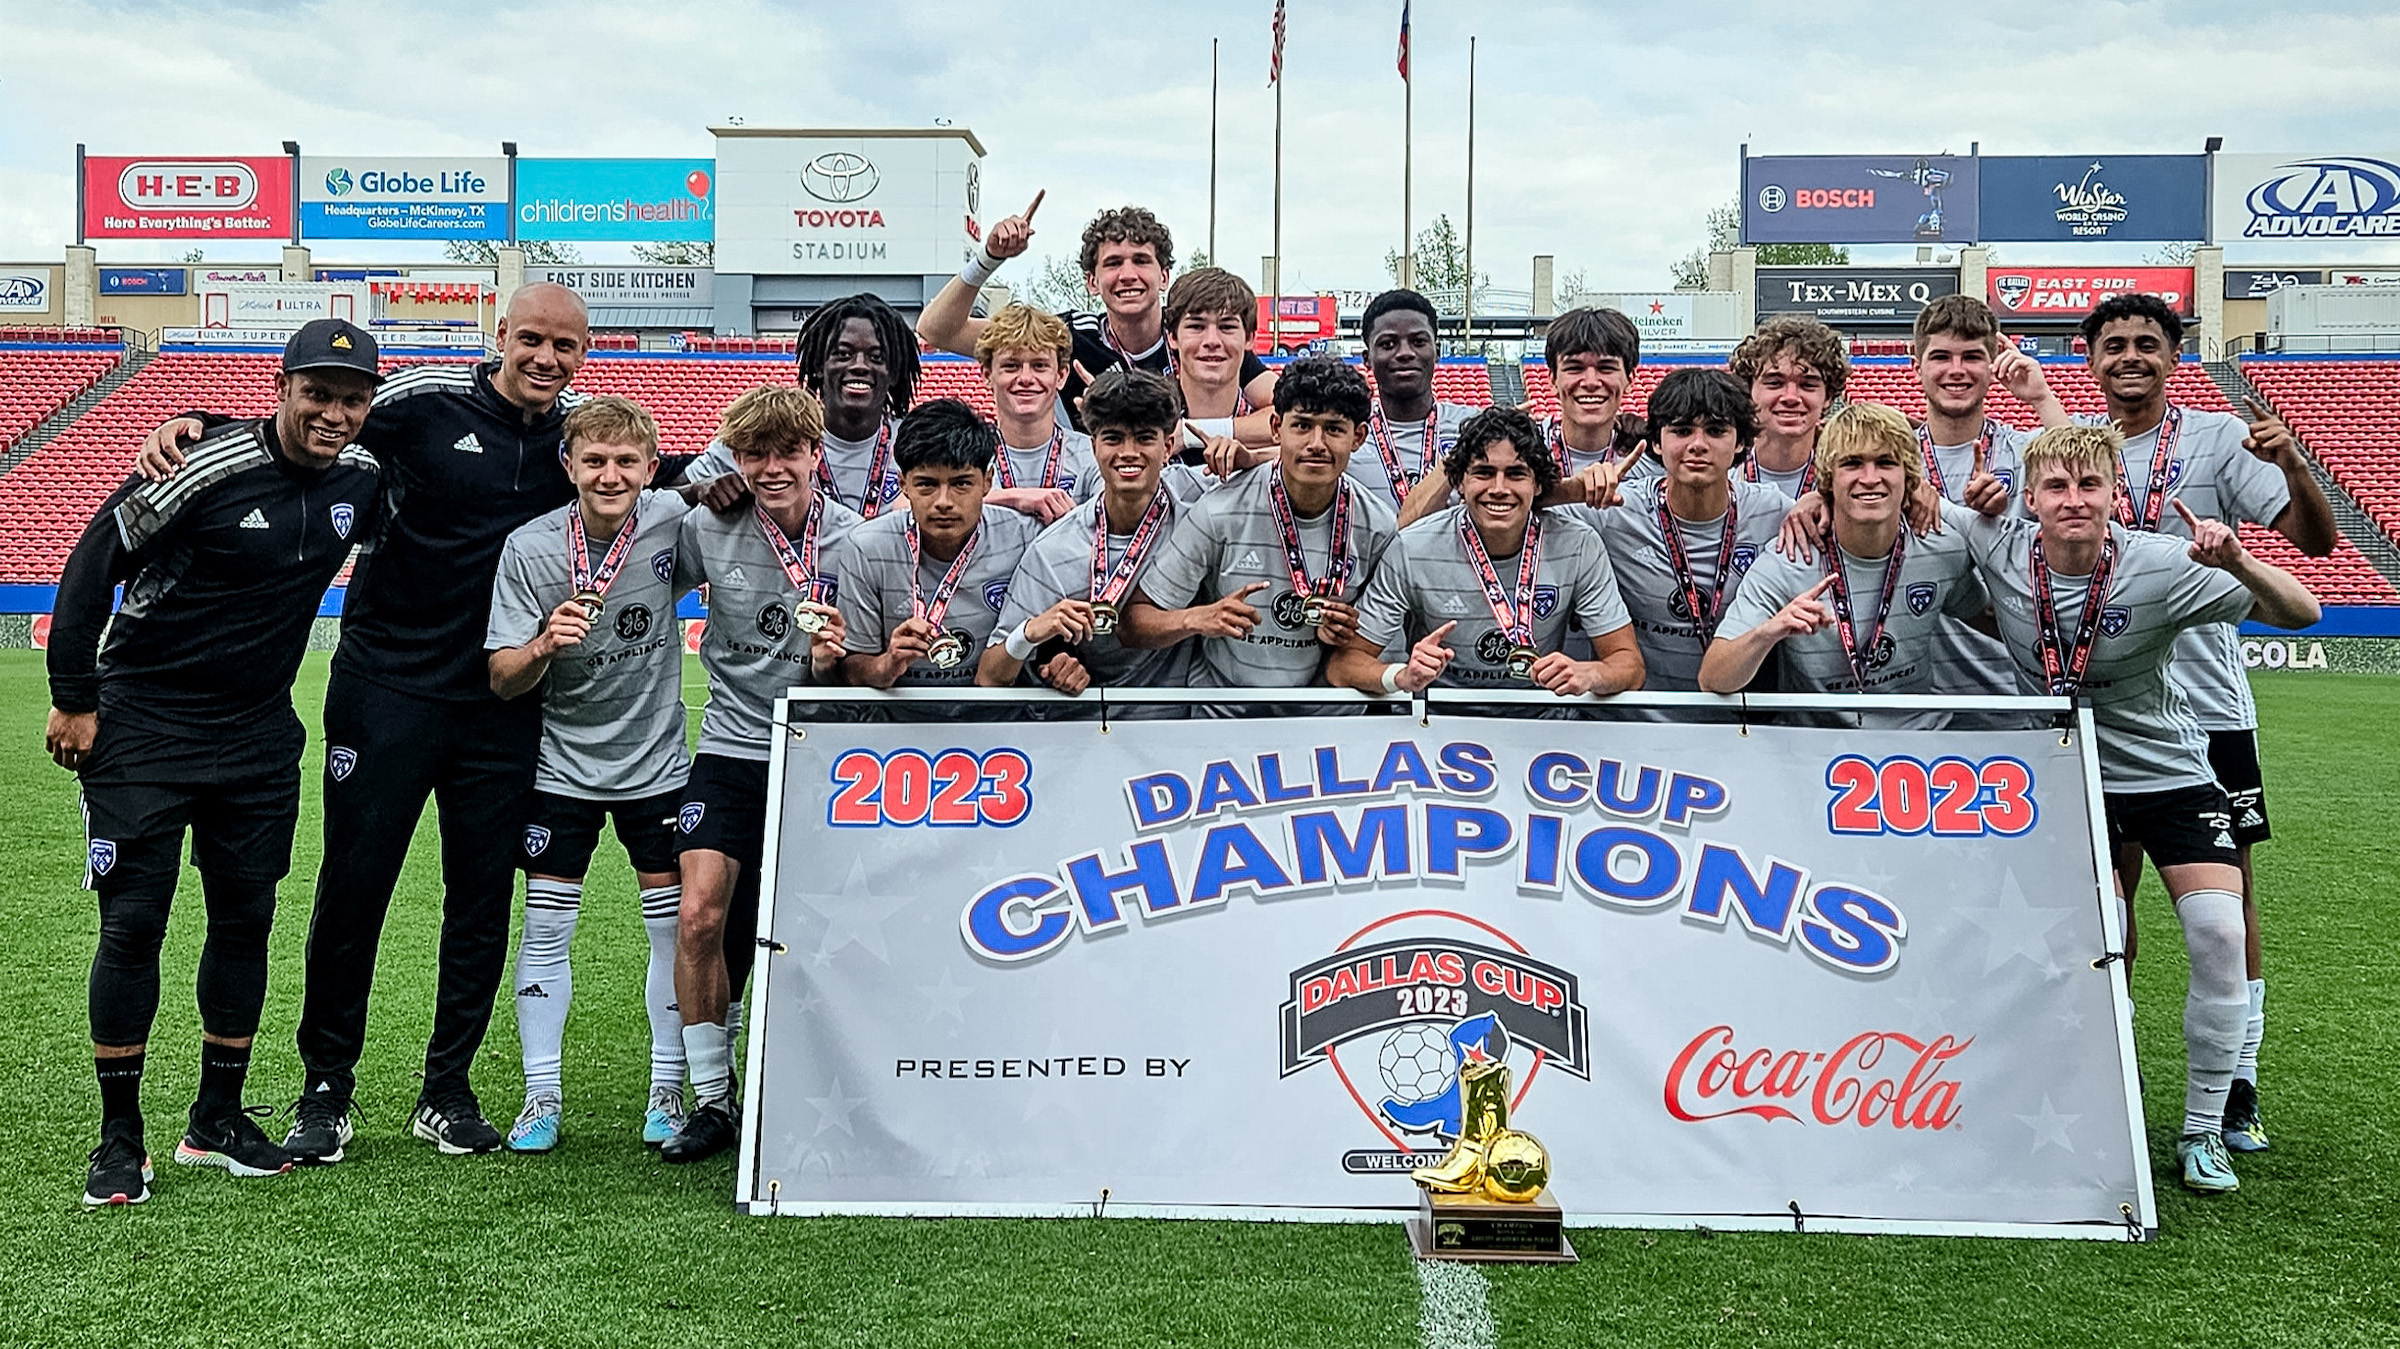 Dallas Cup concludes 2023 event with round of hardfought title matches